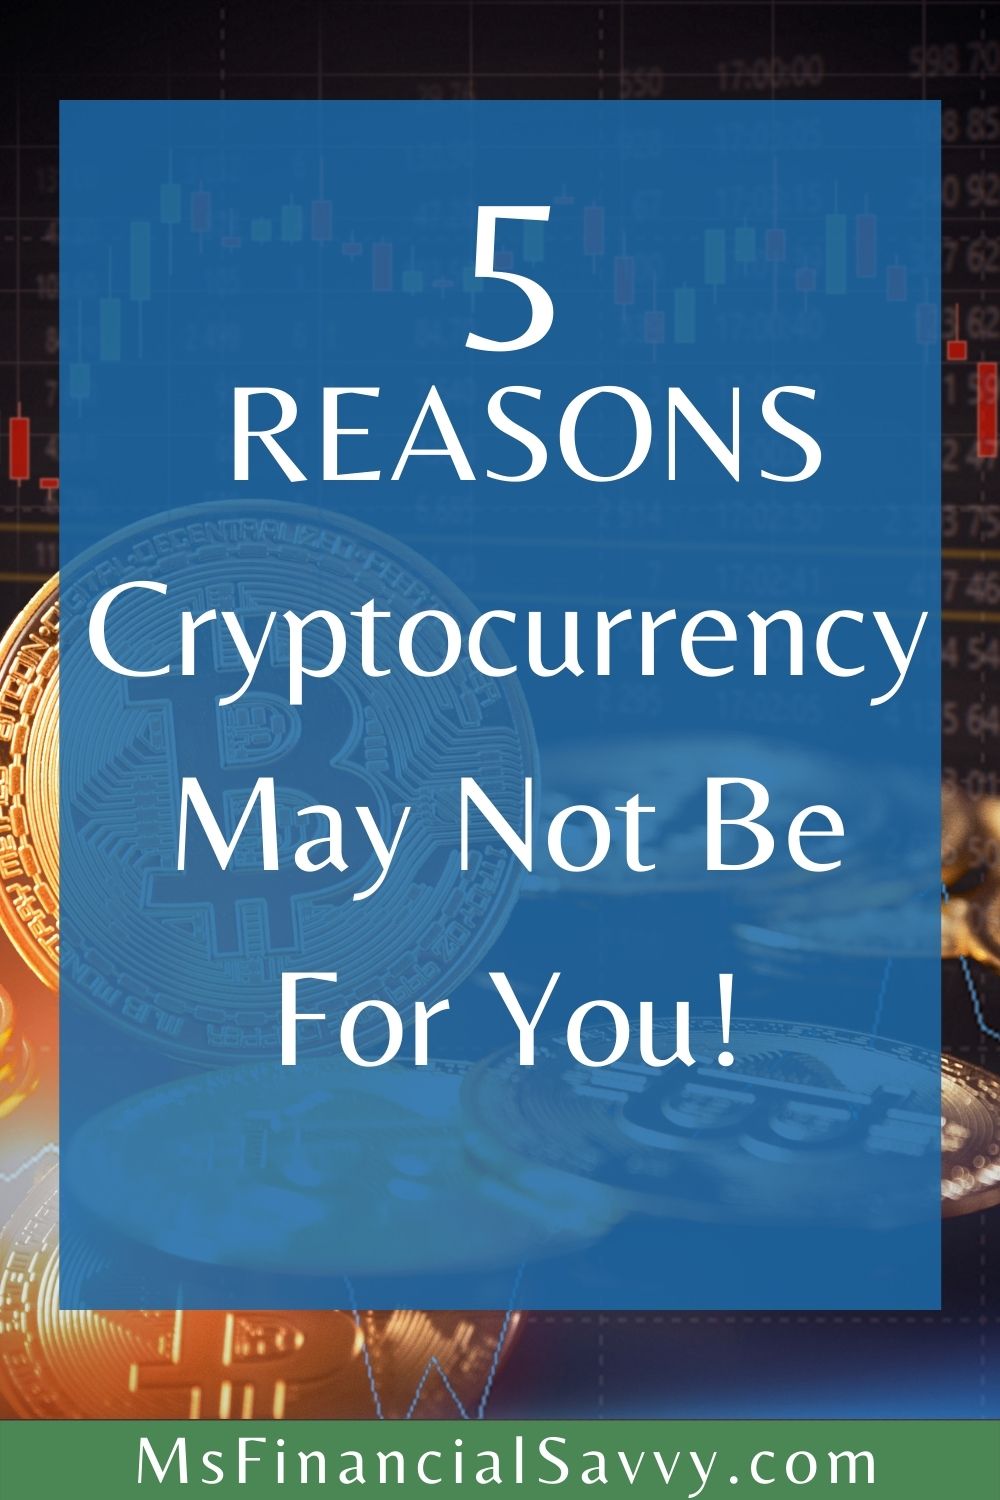 Cryptocurrency Investing is Not for Everyone